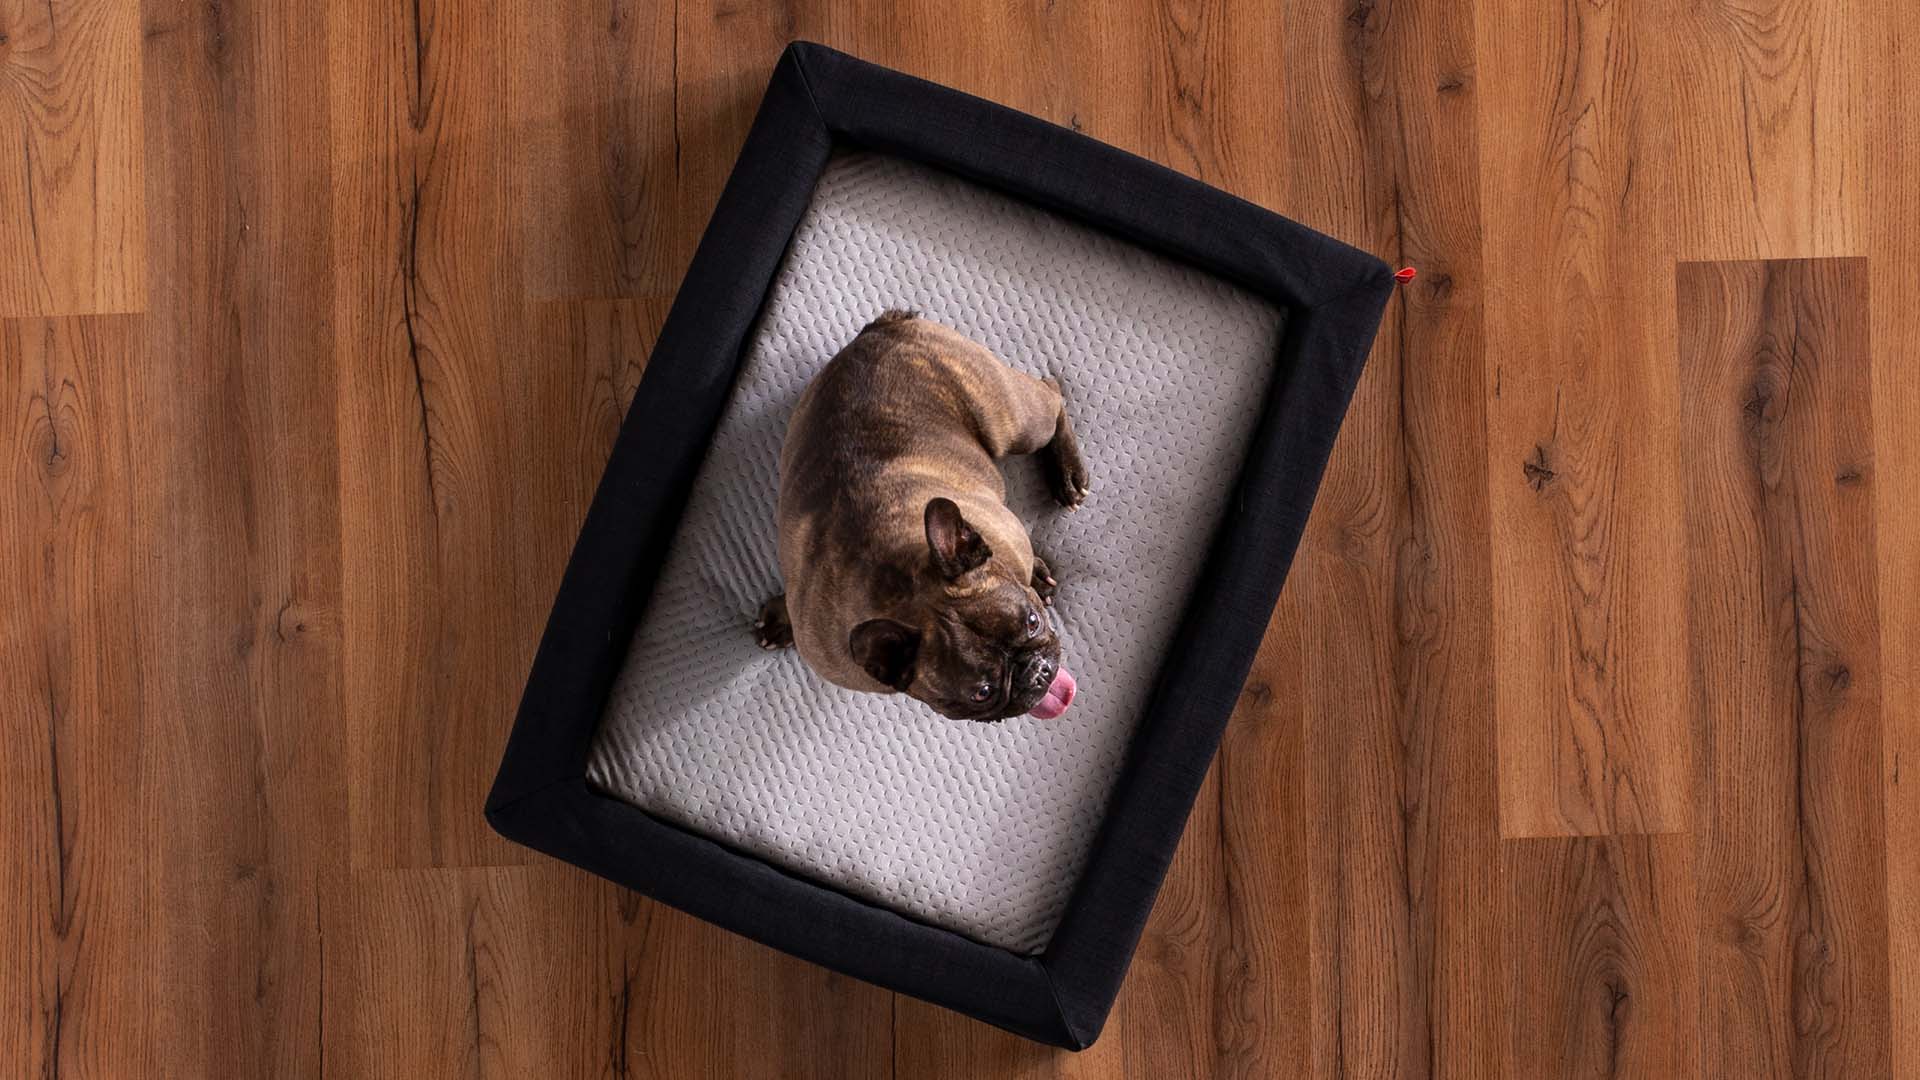 Puppy sitting on a pet bed